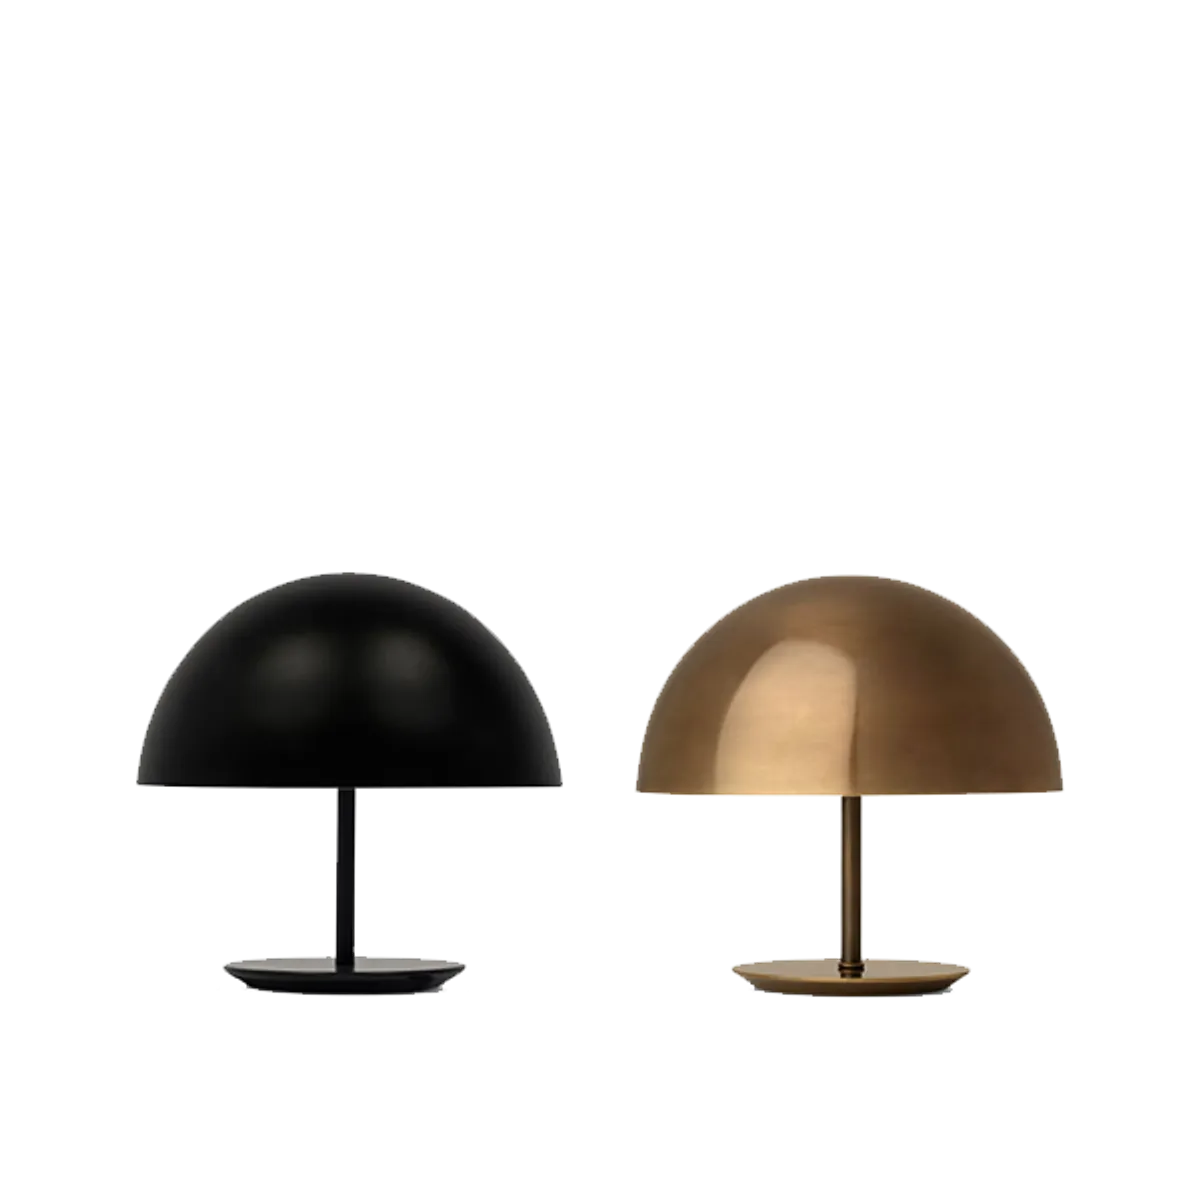 Baby Dome Table Lamps Inside Out Contracts